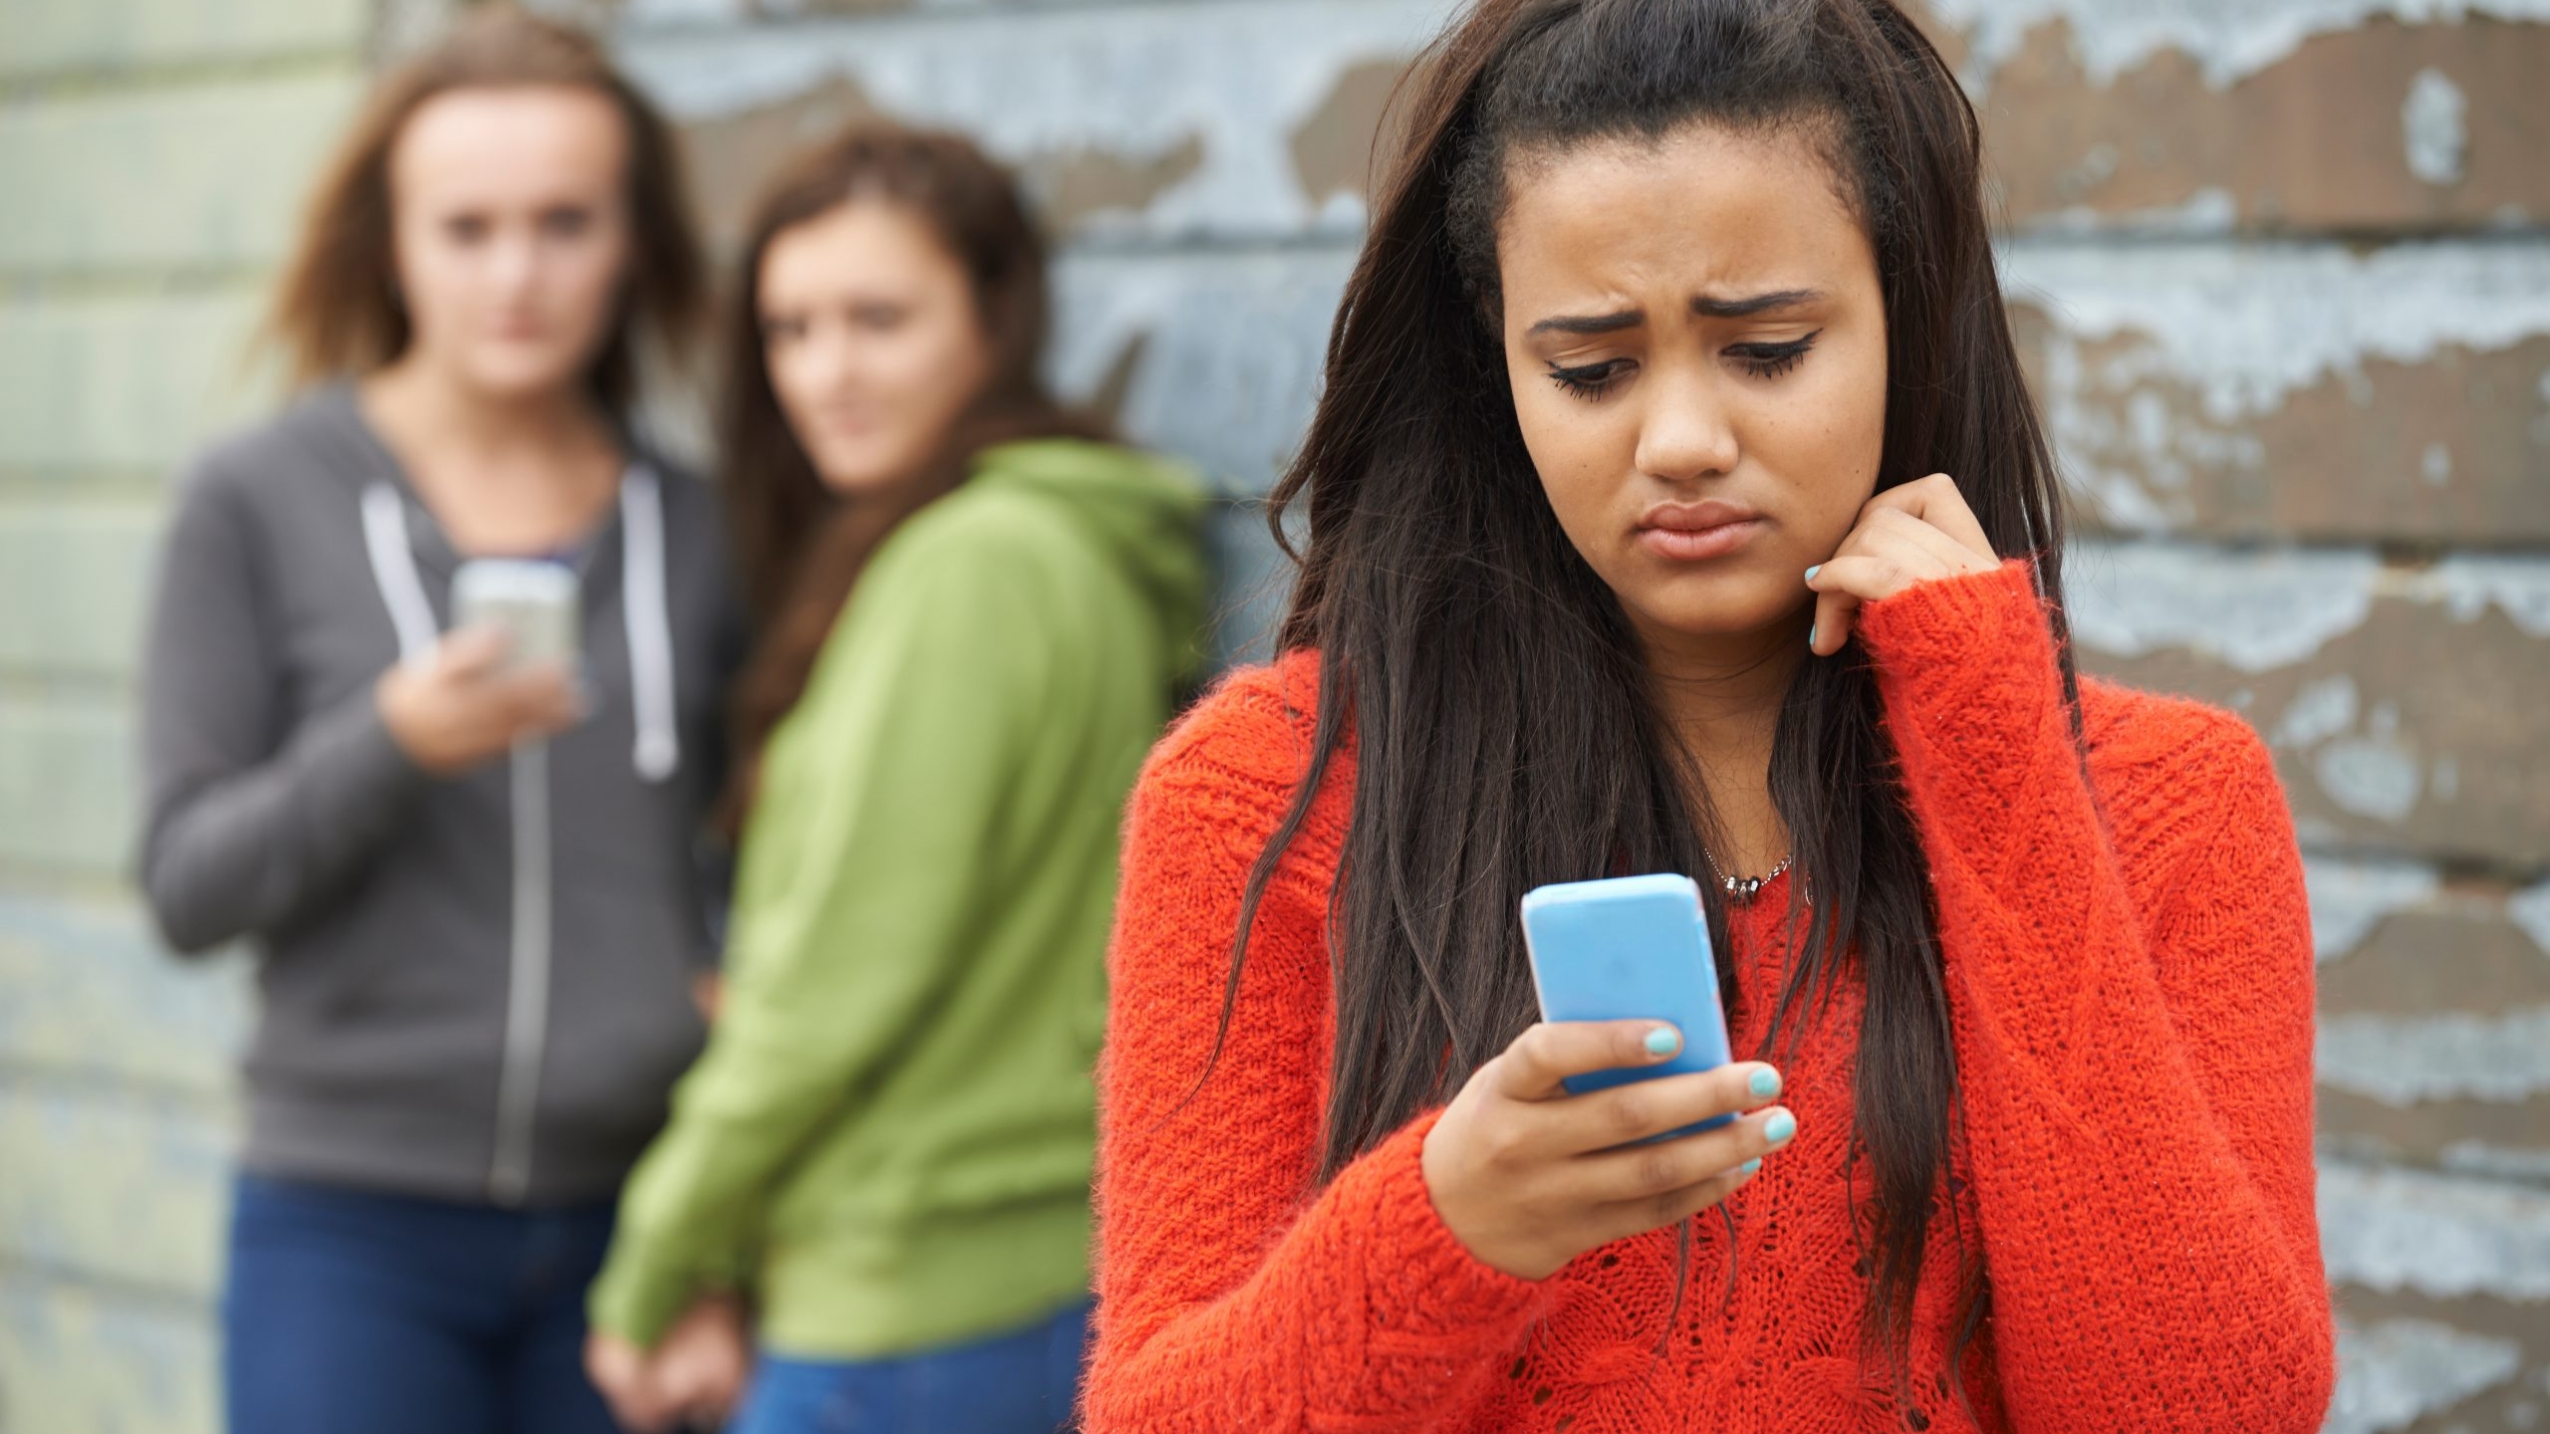 Everything You Need to Know About Cyberbullying